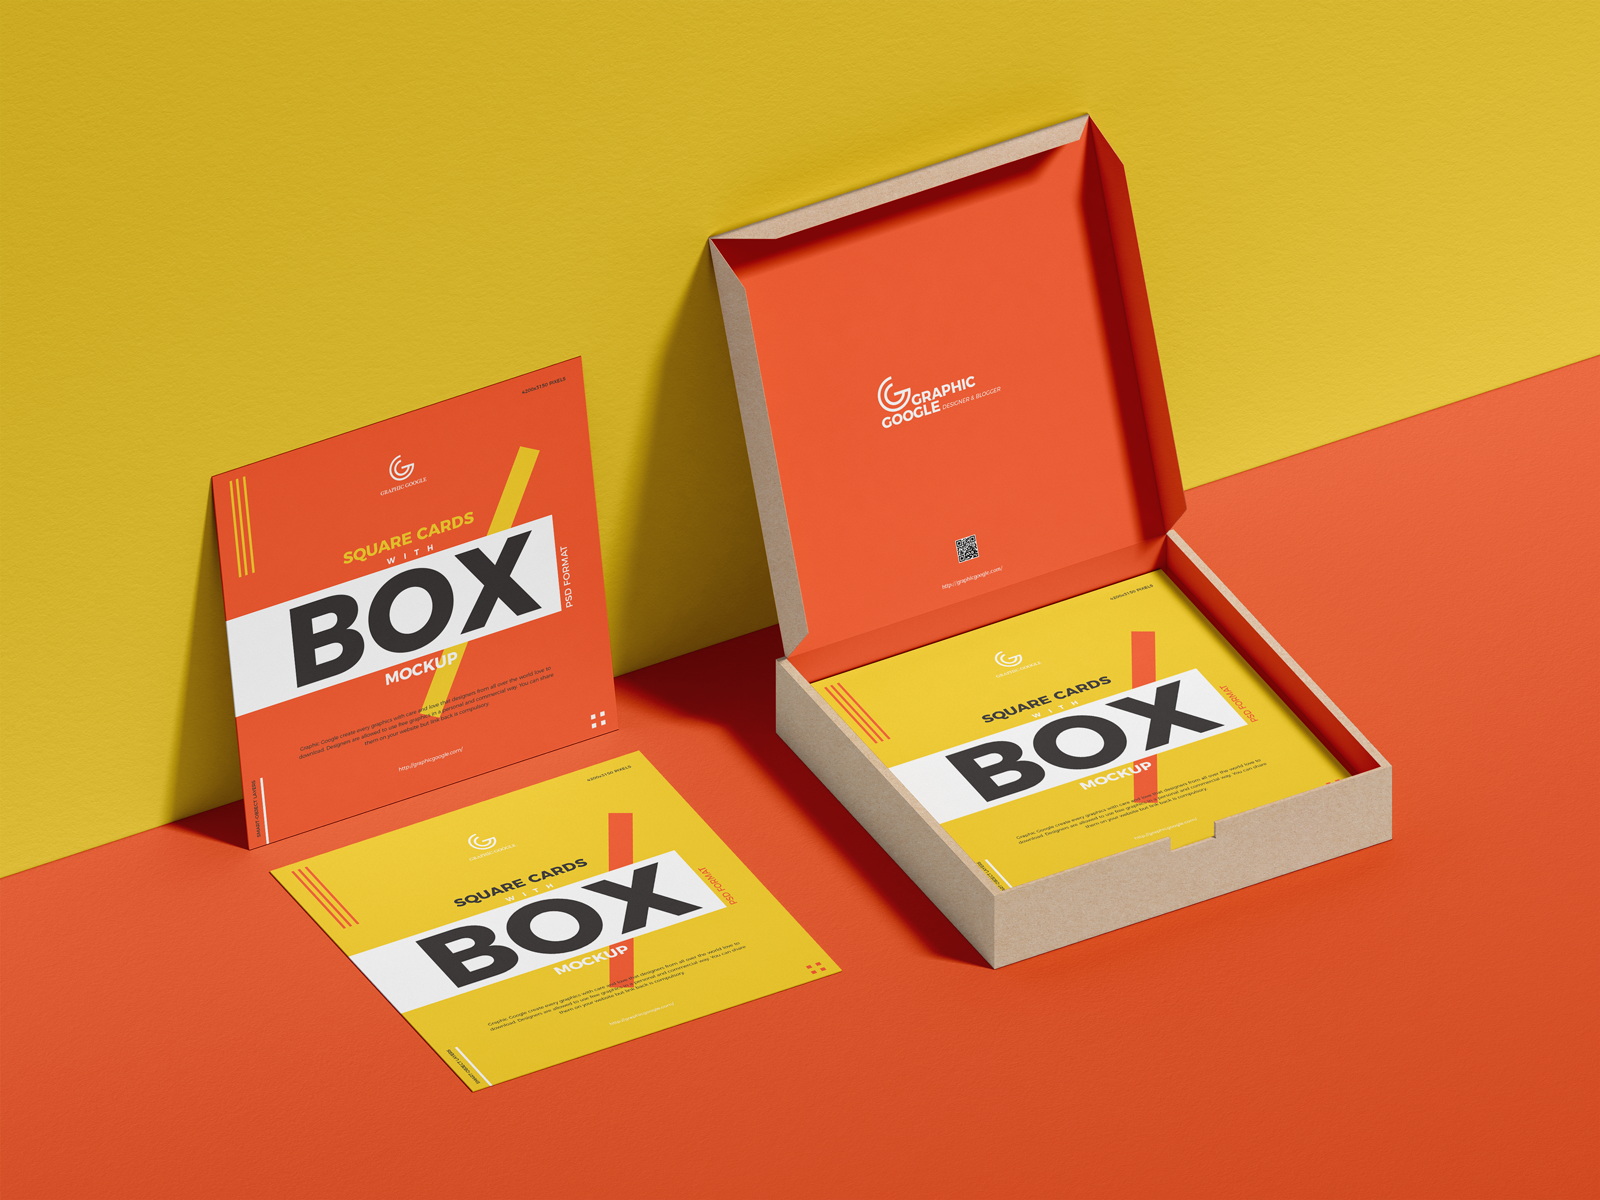 Download Free Square Cards With Box Mockup by Graphic Google on Dribbble